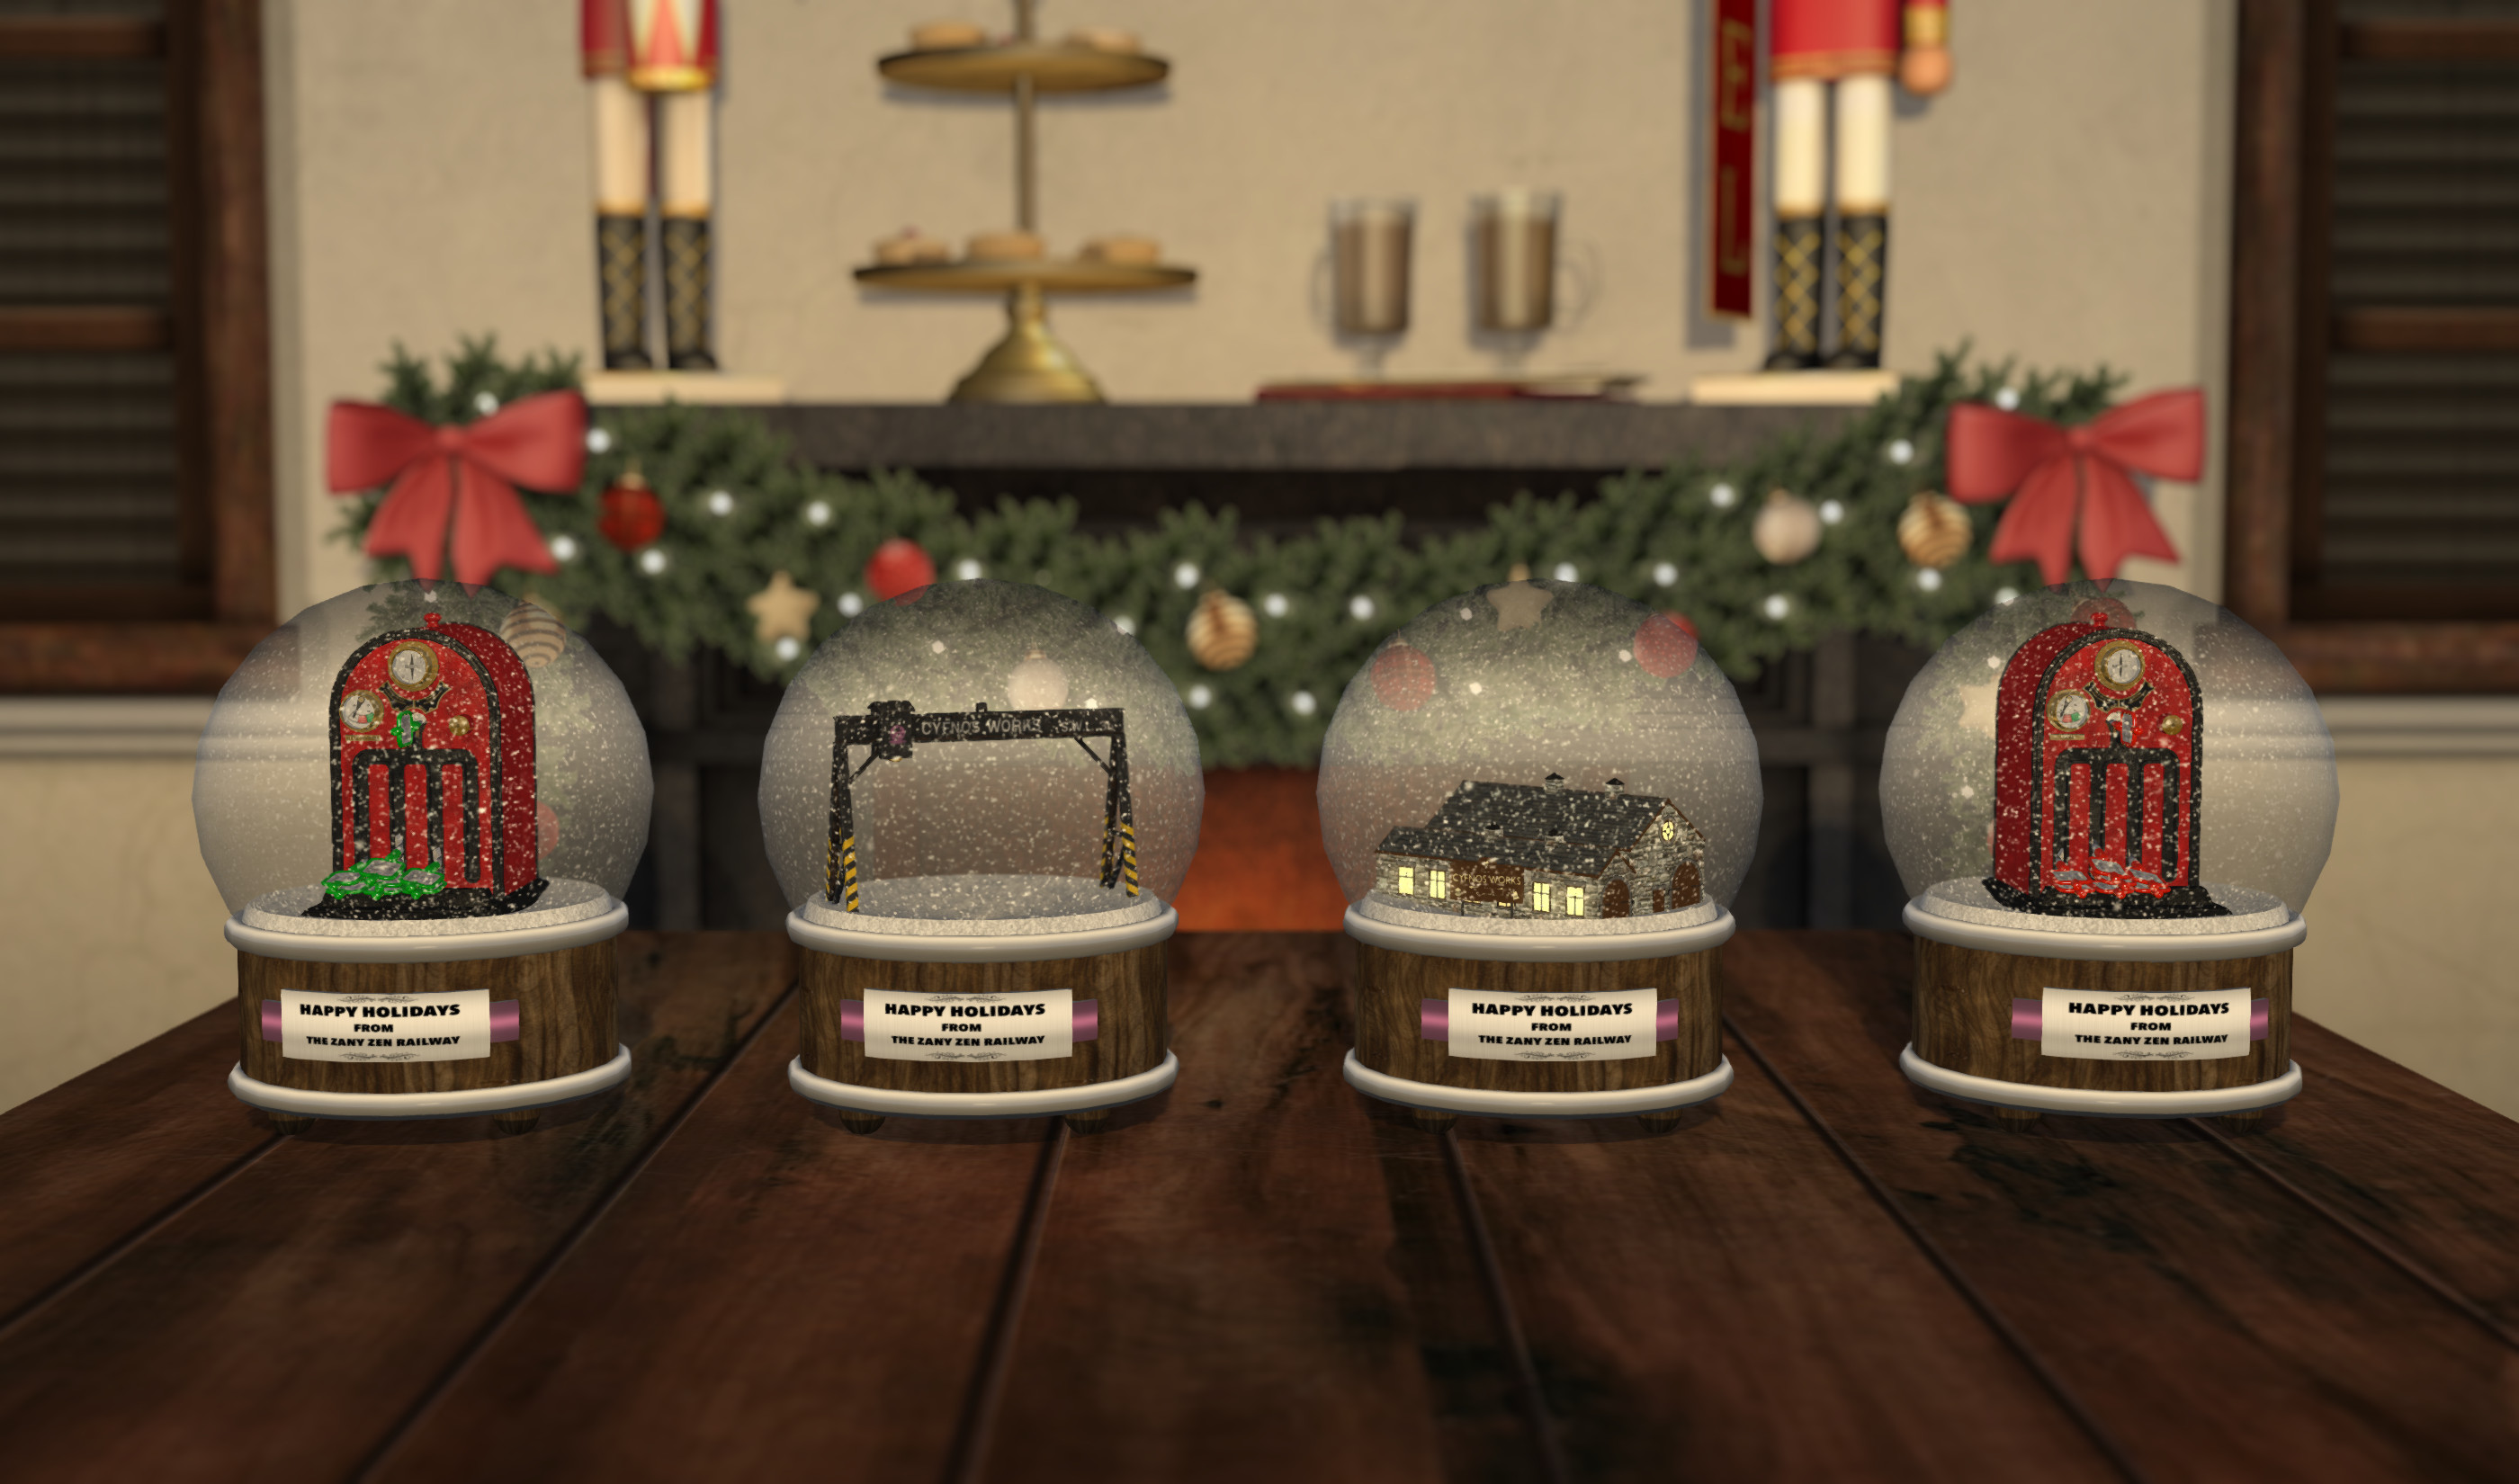 The 4 ZZR Snowglobes for this years Santa Specials